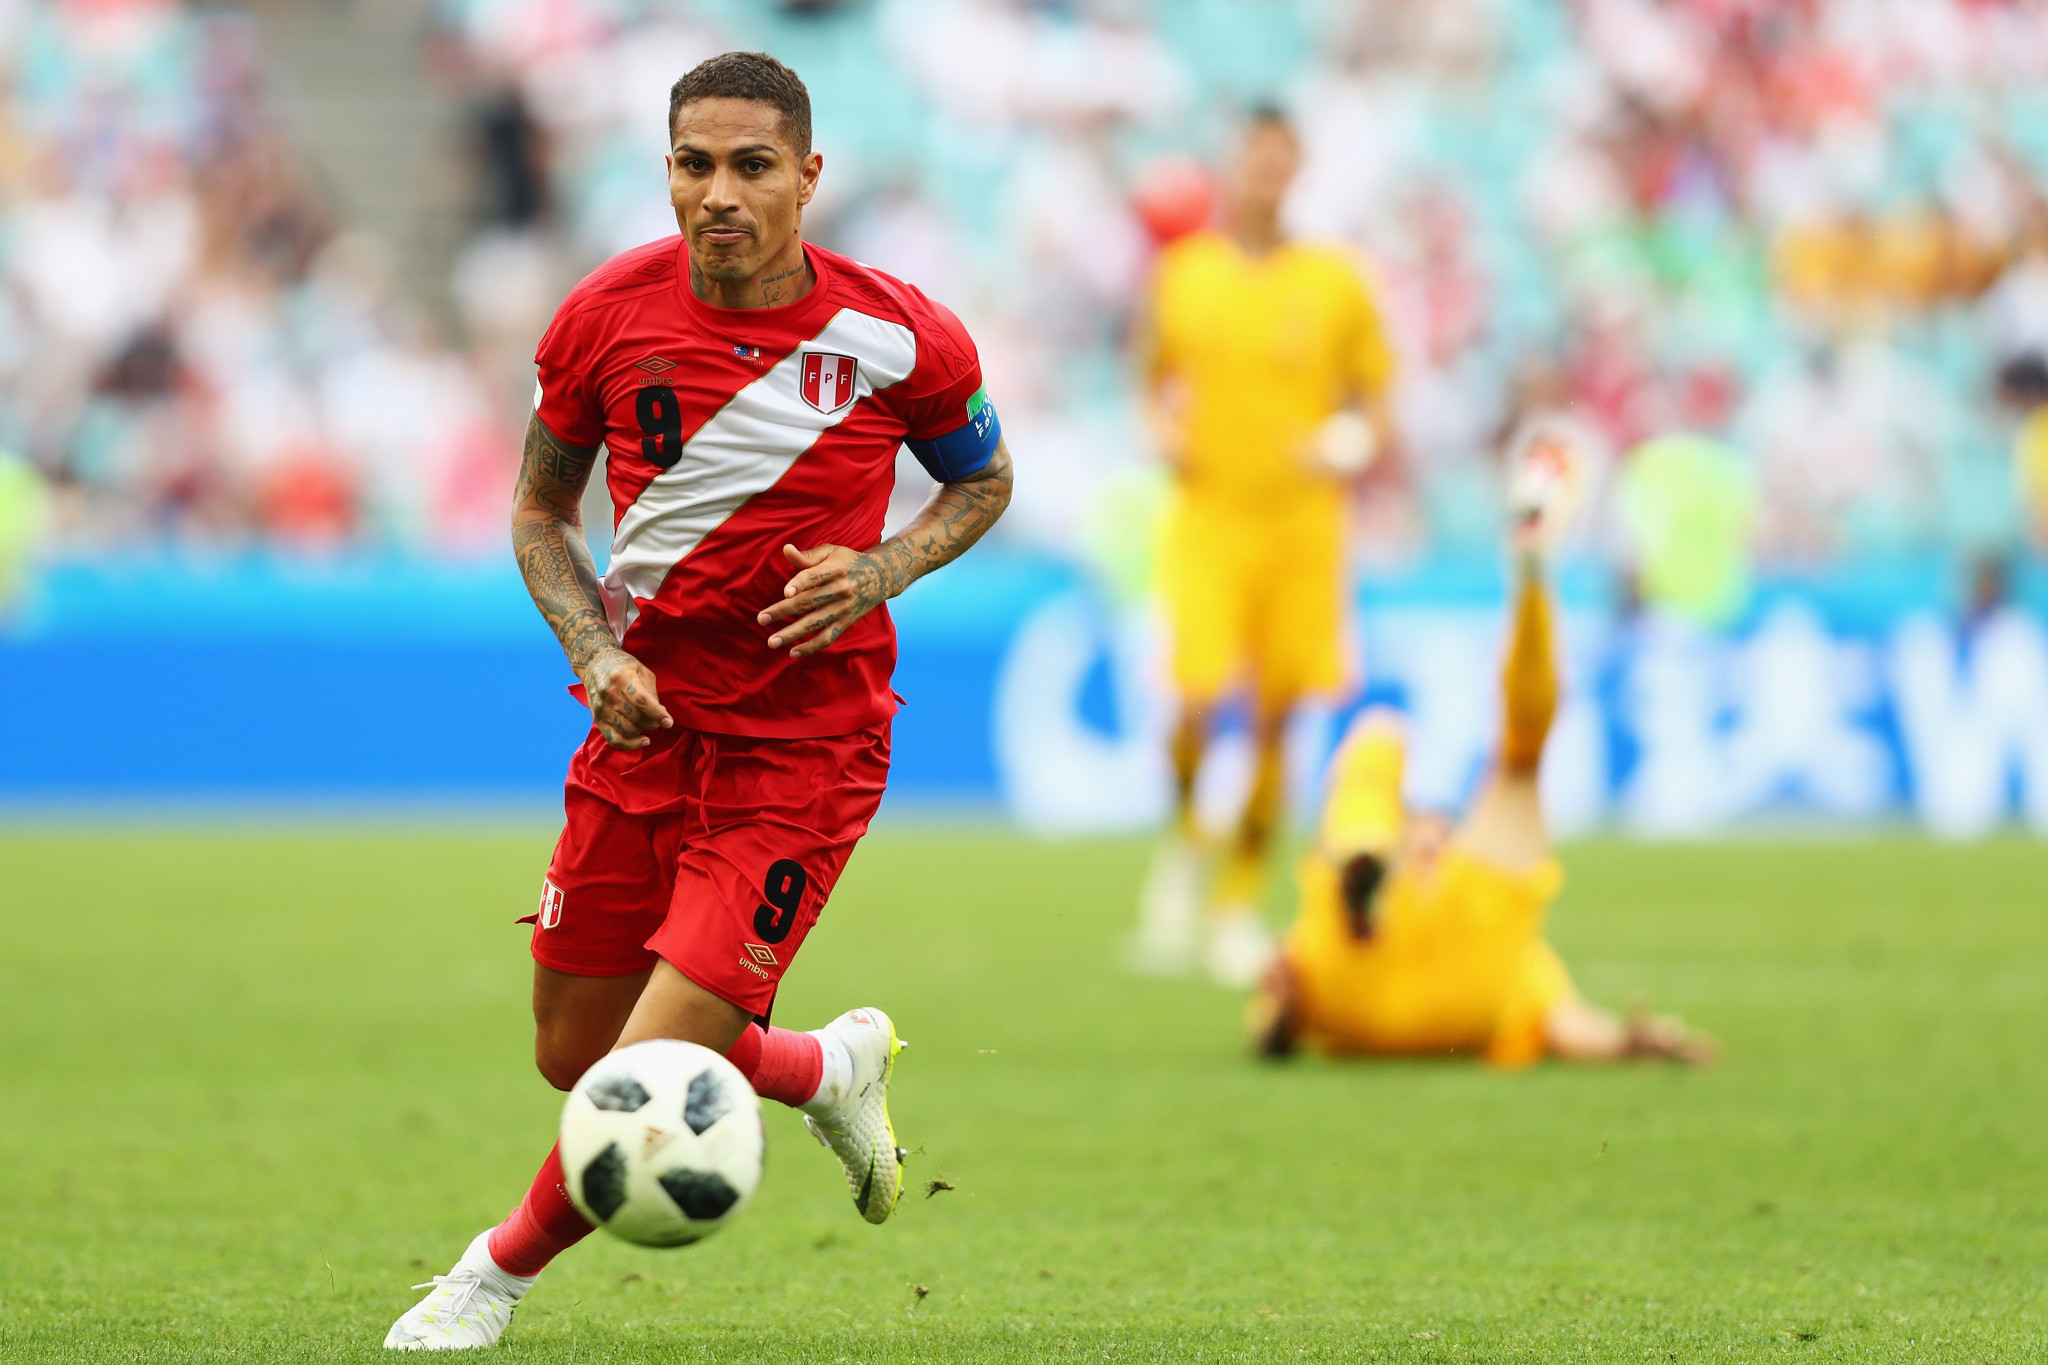 Peru captain Paolo Guerrero was nearly banned from the tournament following a failed drugs test, but no failures have been announced during the World Cup ©Getty Images